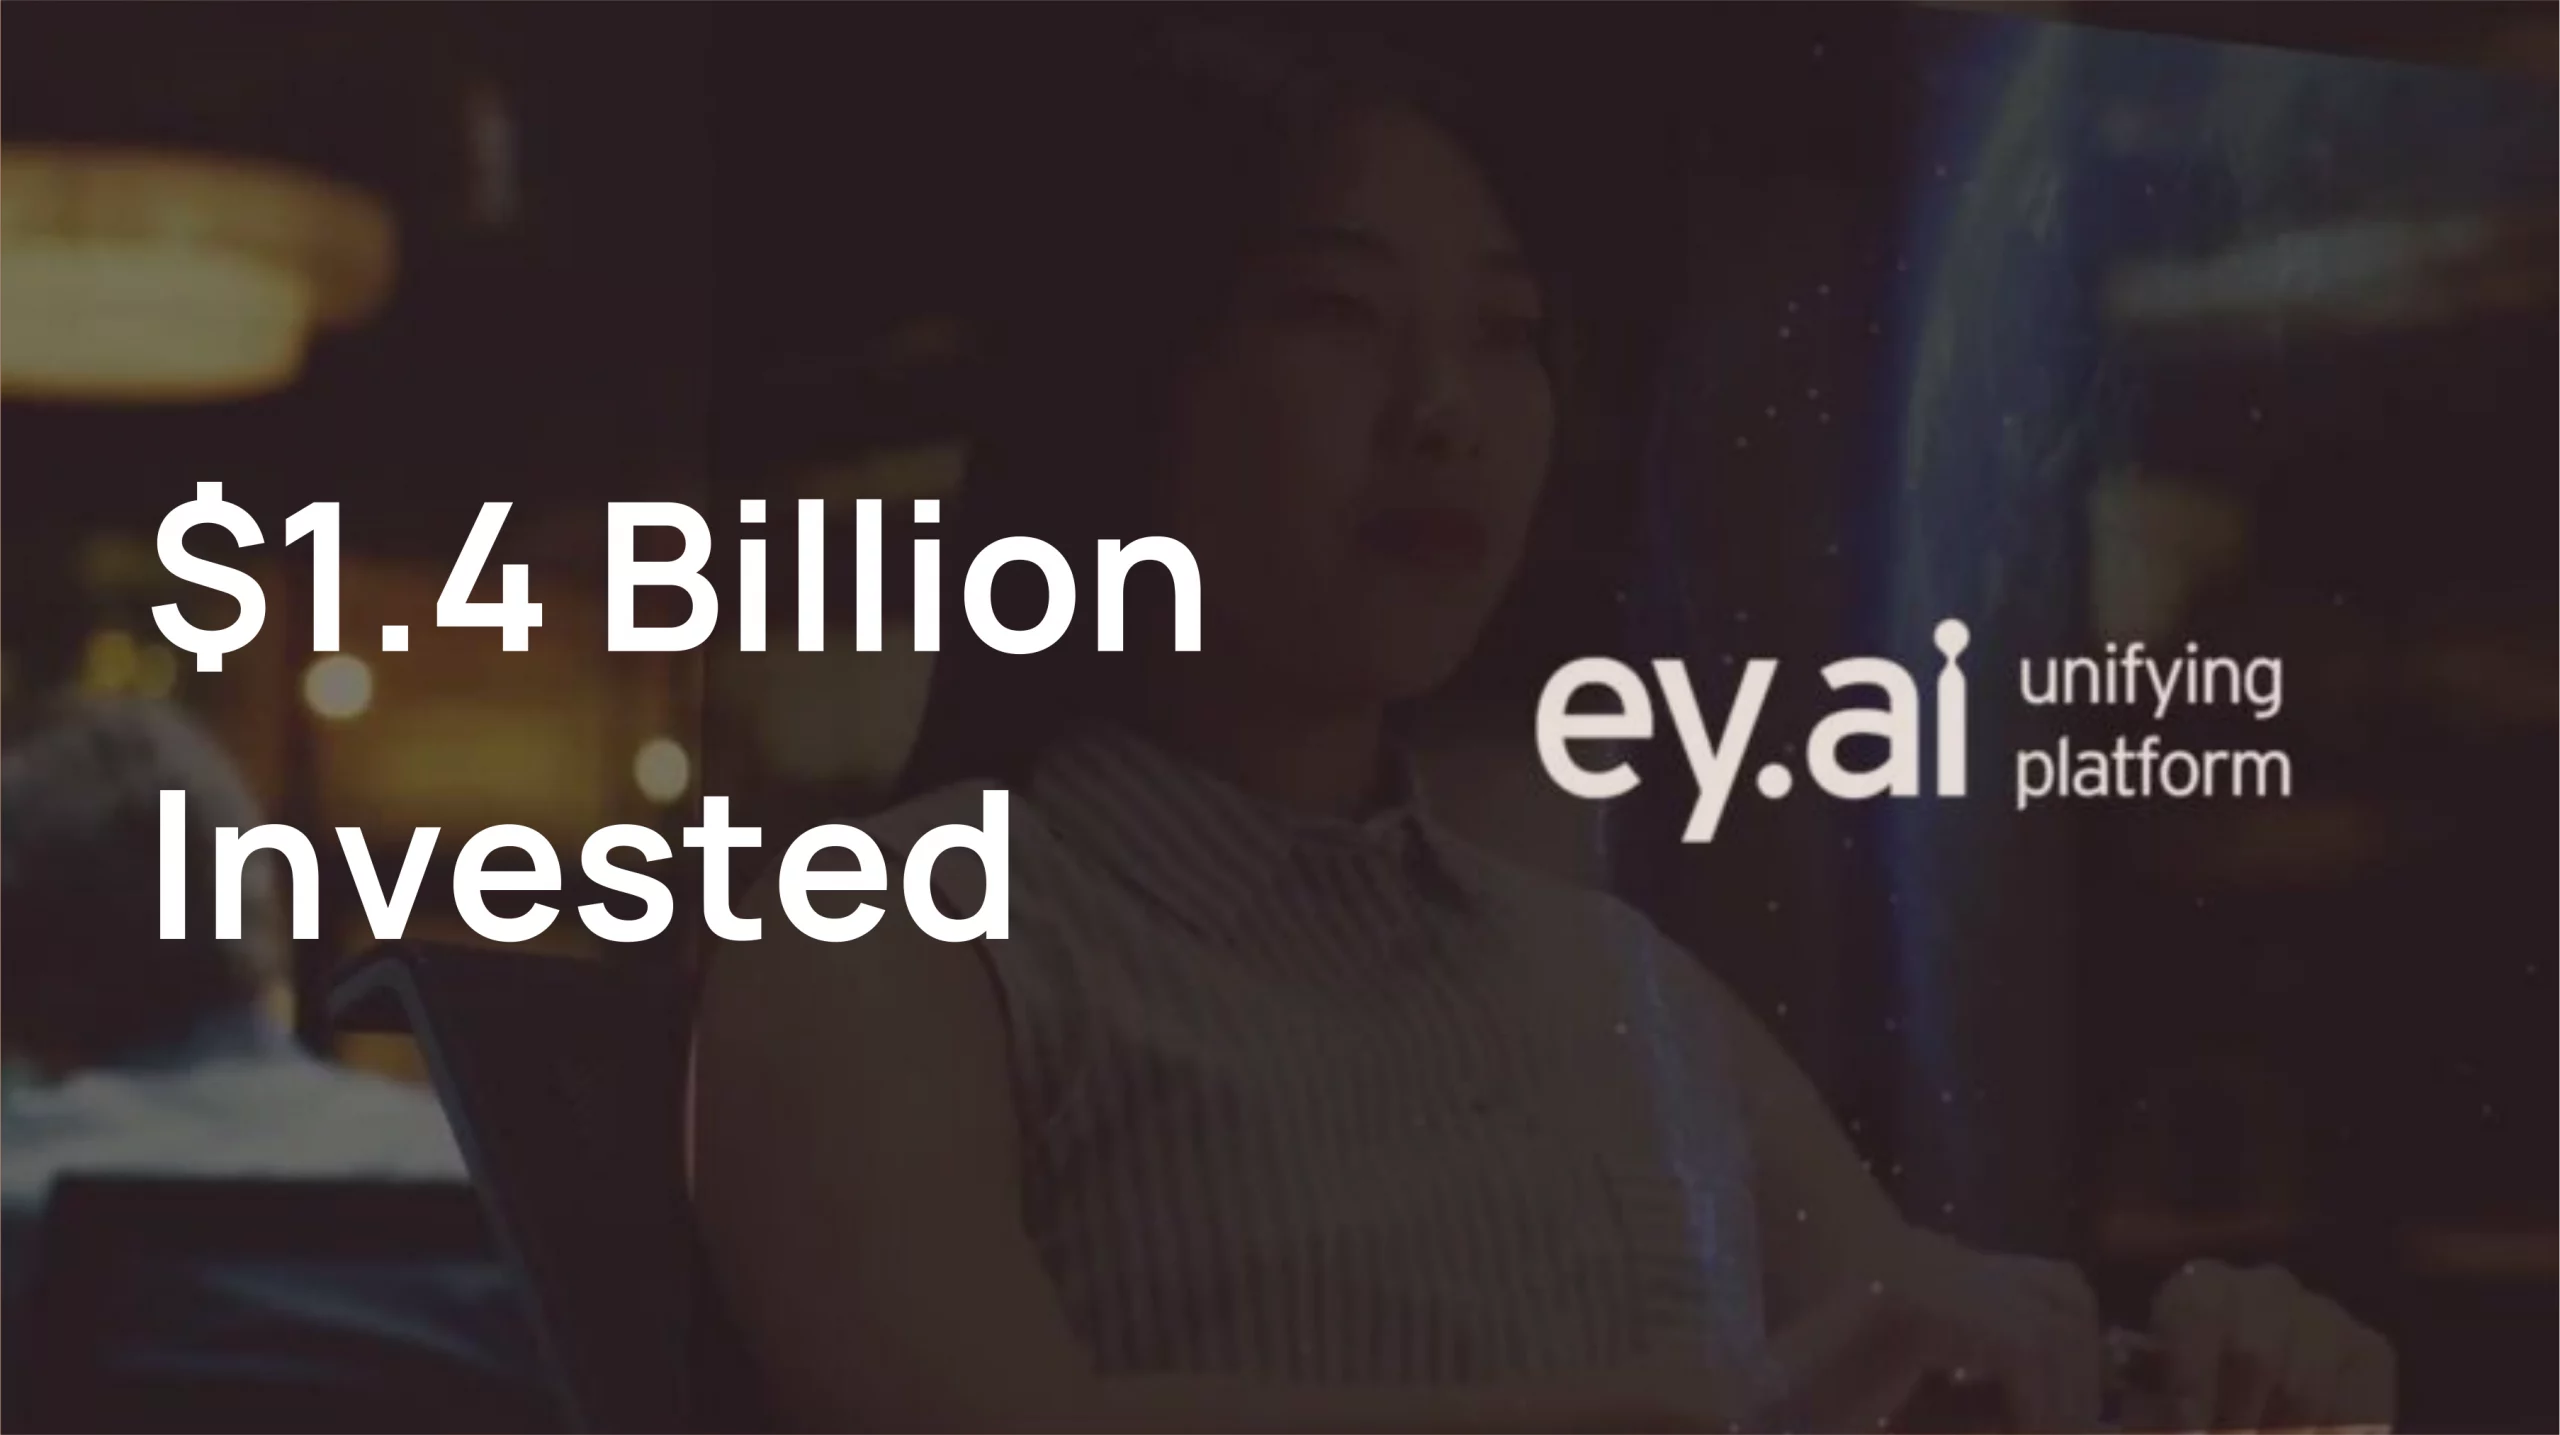 EY.ai is a unifying platform that helps clients to confidently and responsibly embrace AI. This tool can lead to amazing transformations within their organizations, helping businesses succeed in the AI-driven future.